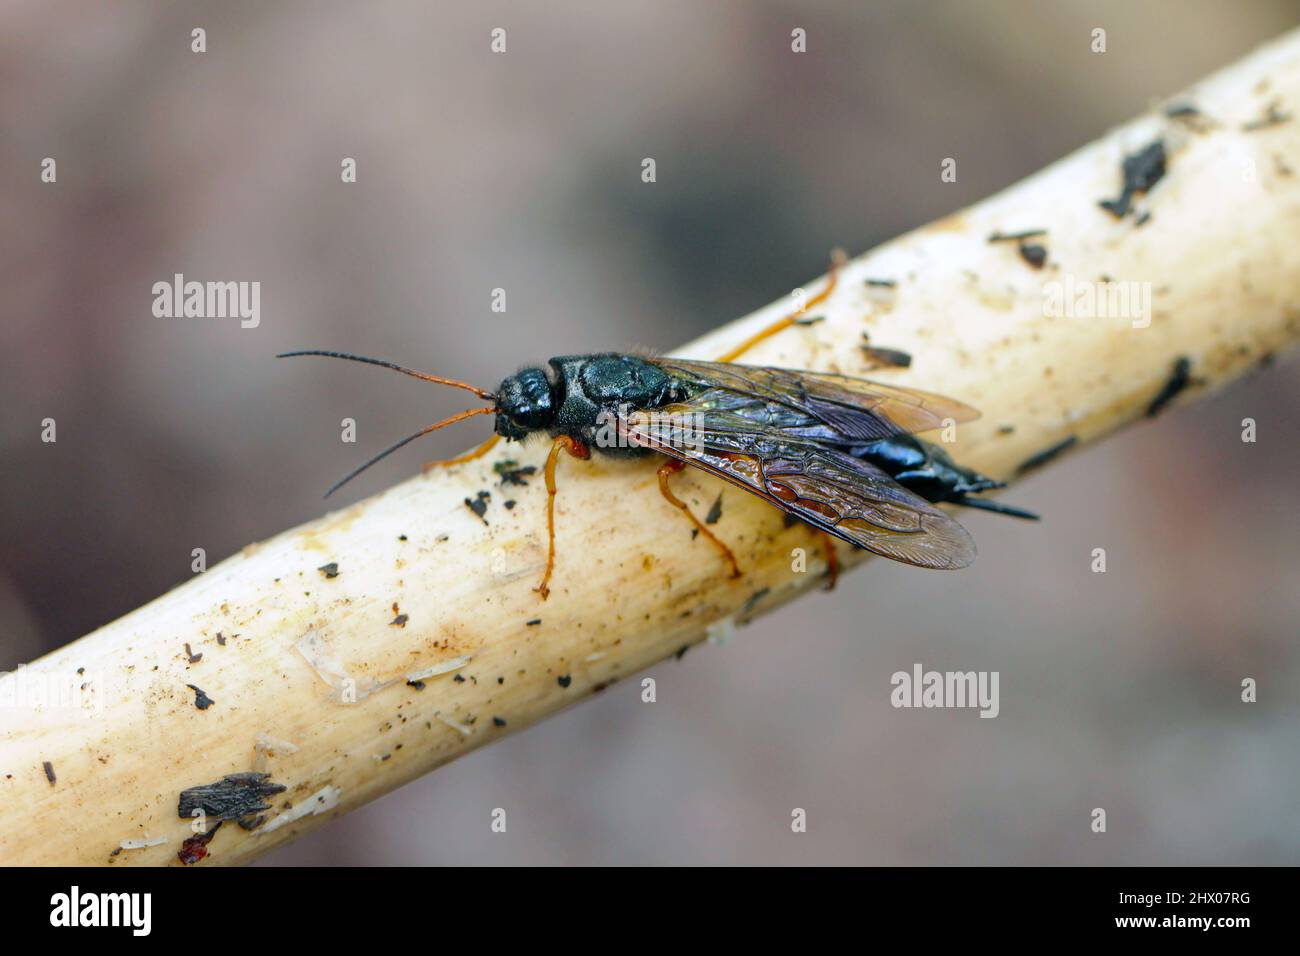 Horntail or wood wasp Sirex juvencus on the spruce branch. Stock Photo